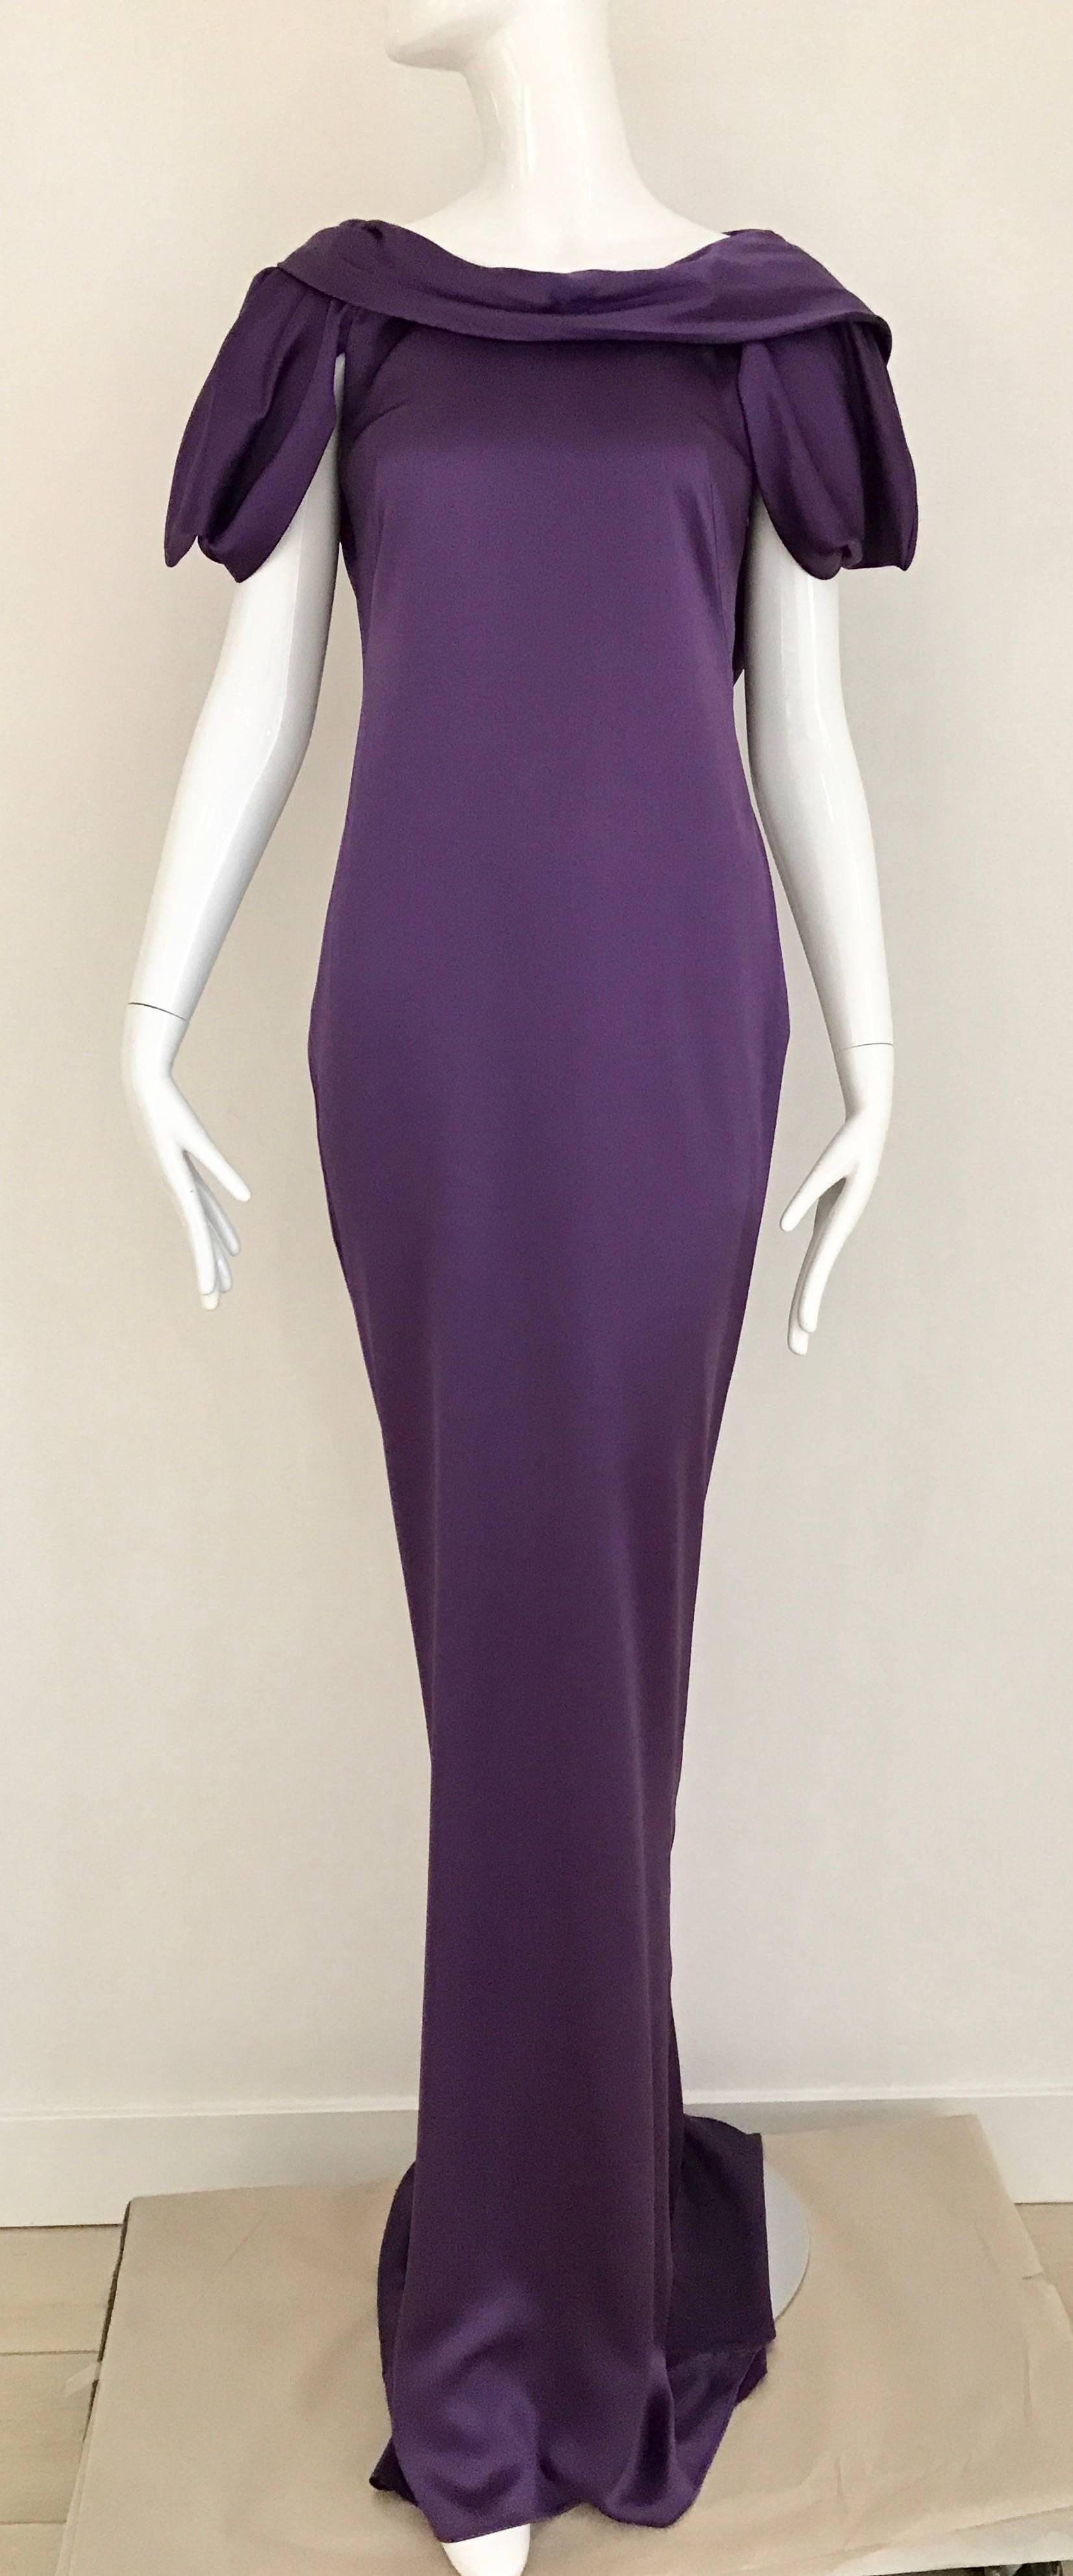 Stunning Alexander McQueen Purple violet silk charmeuse gown with interesting sleeves and exposed bare back. Slightly cowl neck. strap can be removed. Dress zip from the side. Size Medium / 6

Bust: 36 inch ( back is open) / Waist: 30 inch
Hip: 36.5